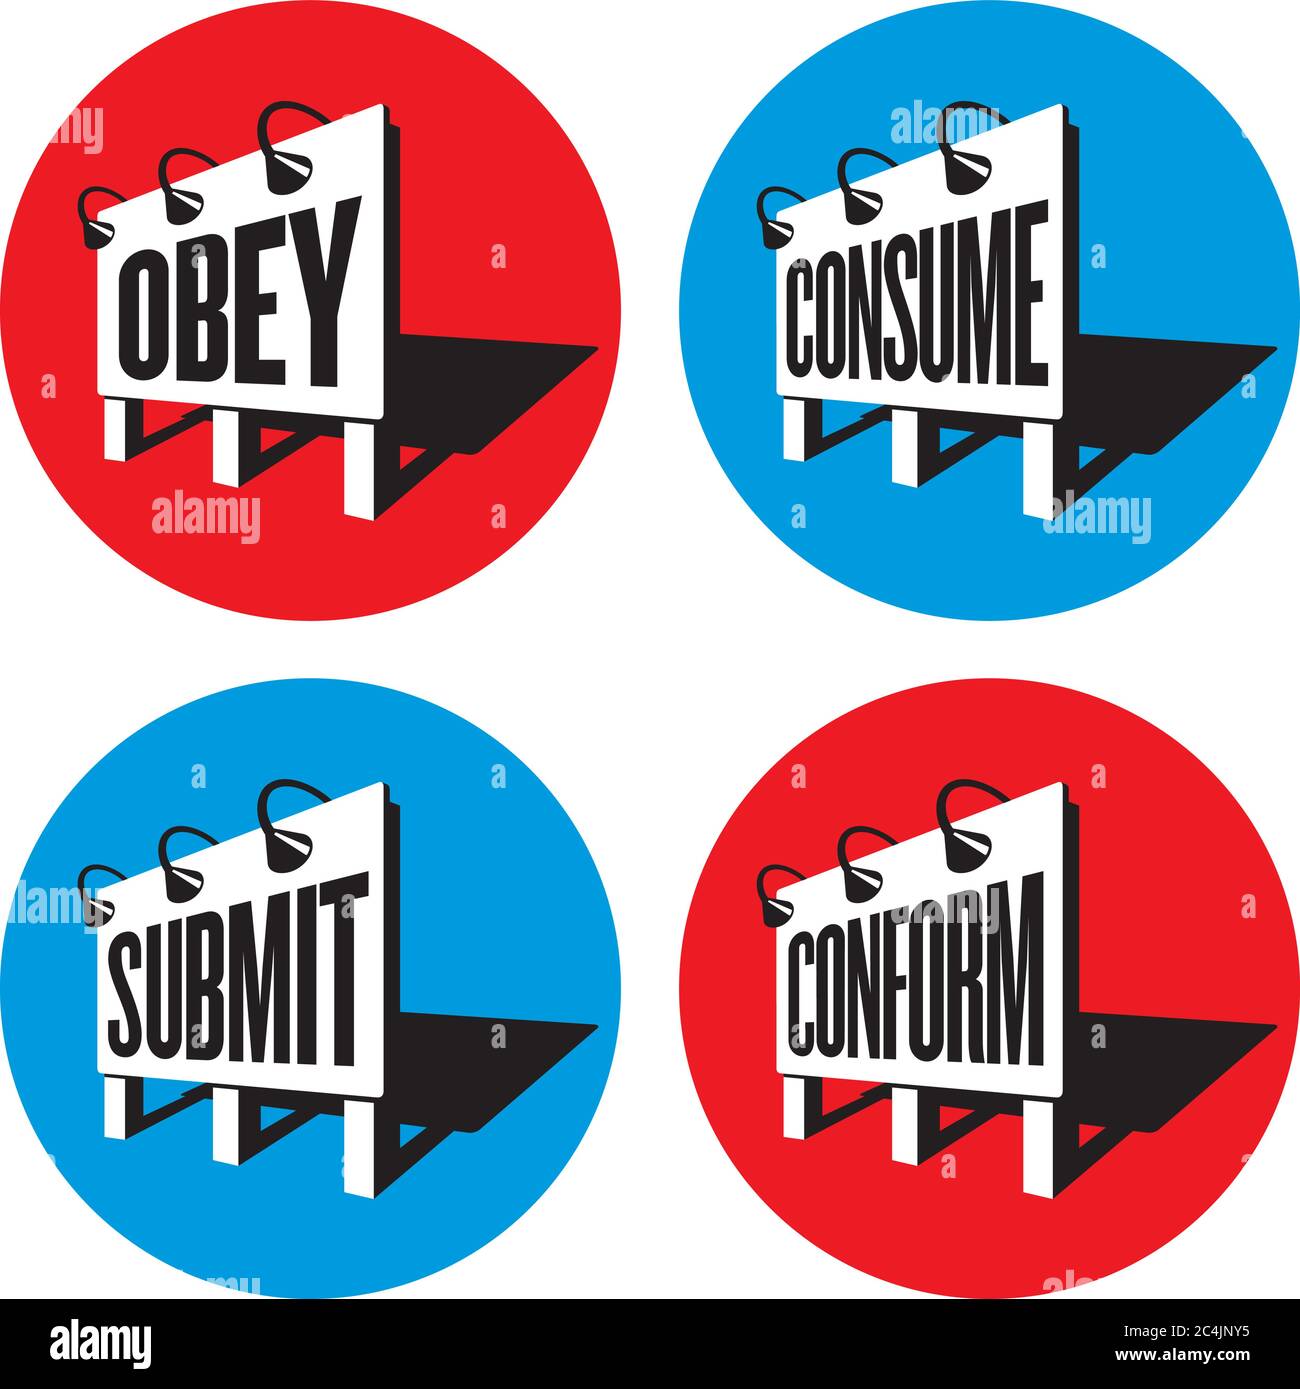 Set of four subliminal messaging propaganda billboard signs telling people to obey and conform. Inspired by the science fiction movie, They Live. Stock Vector